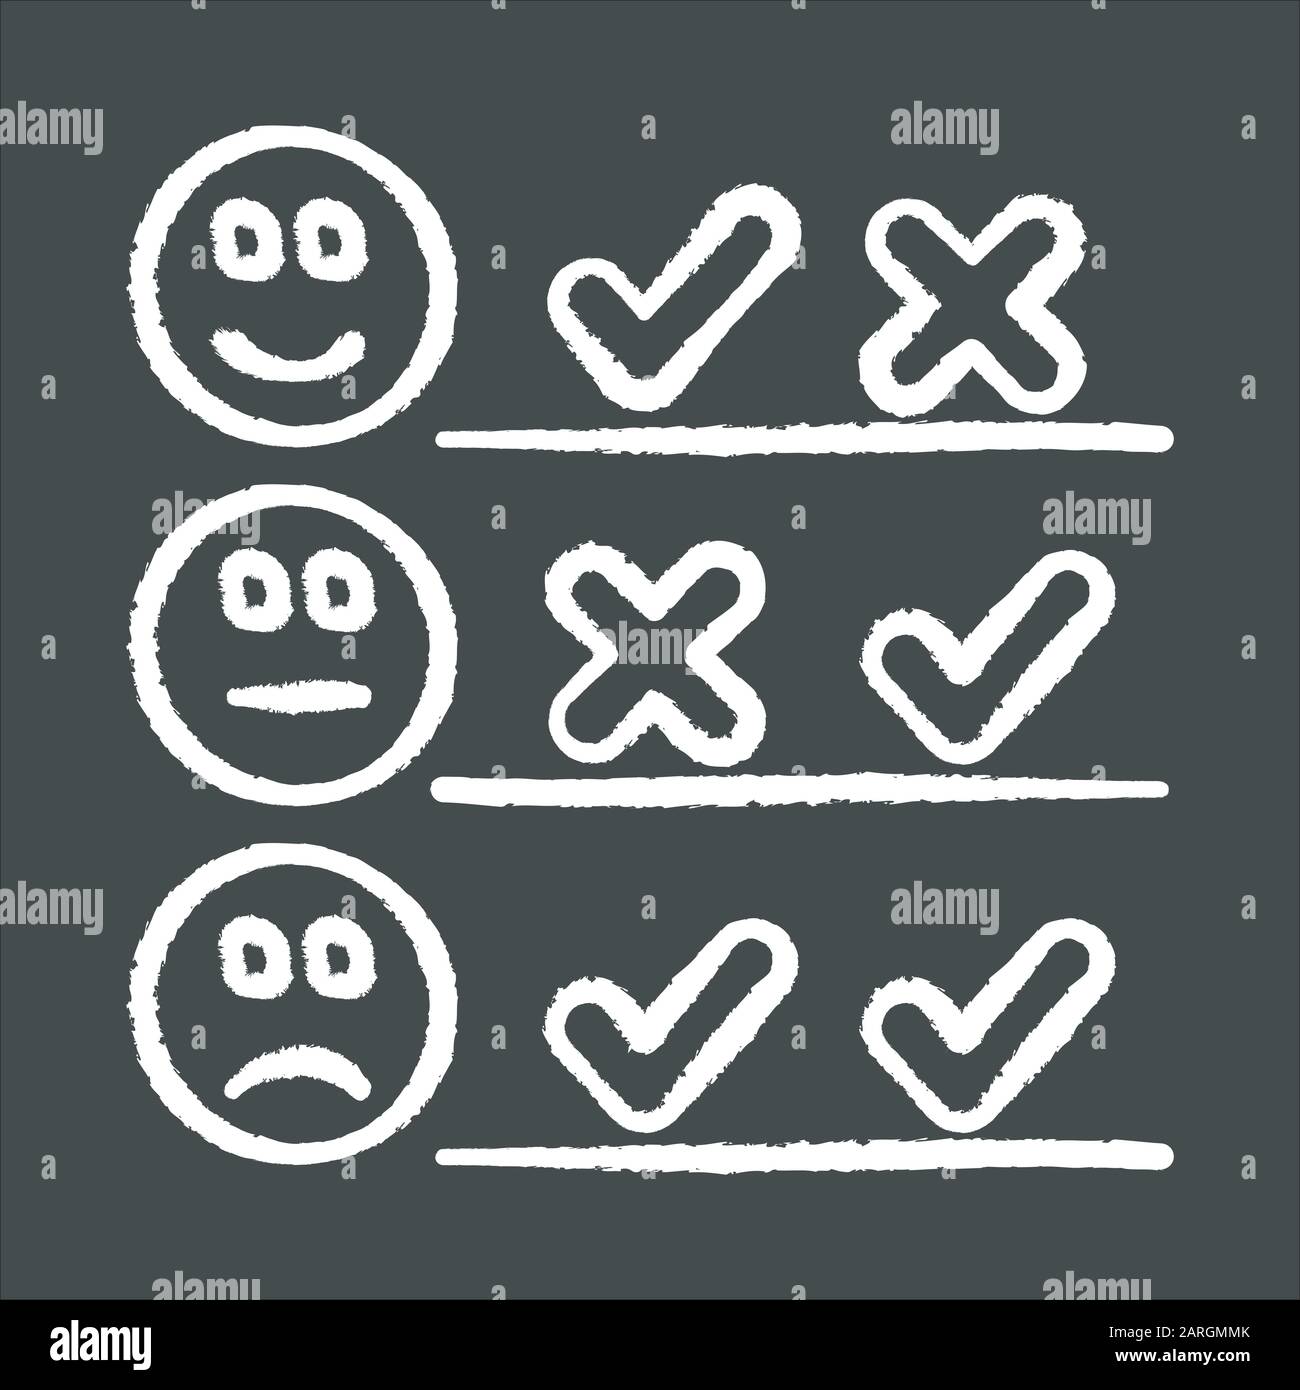 Checklist chalk icon. Choosing option. Good, bad experience. Voting. Check list. Agree, disagree. Satisfaction level. Positive, negative. Multiple opi Stock Vector